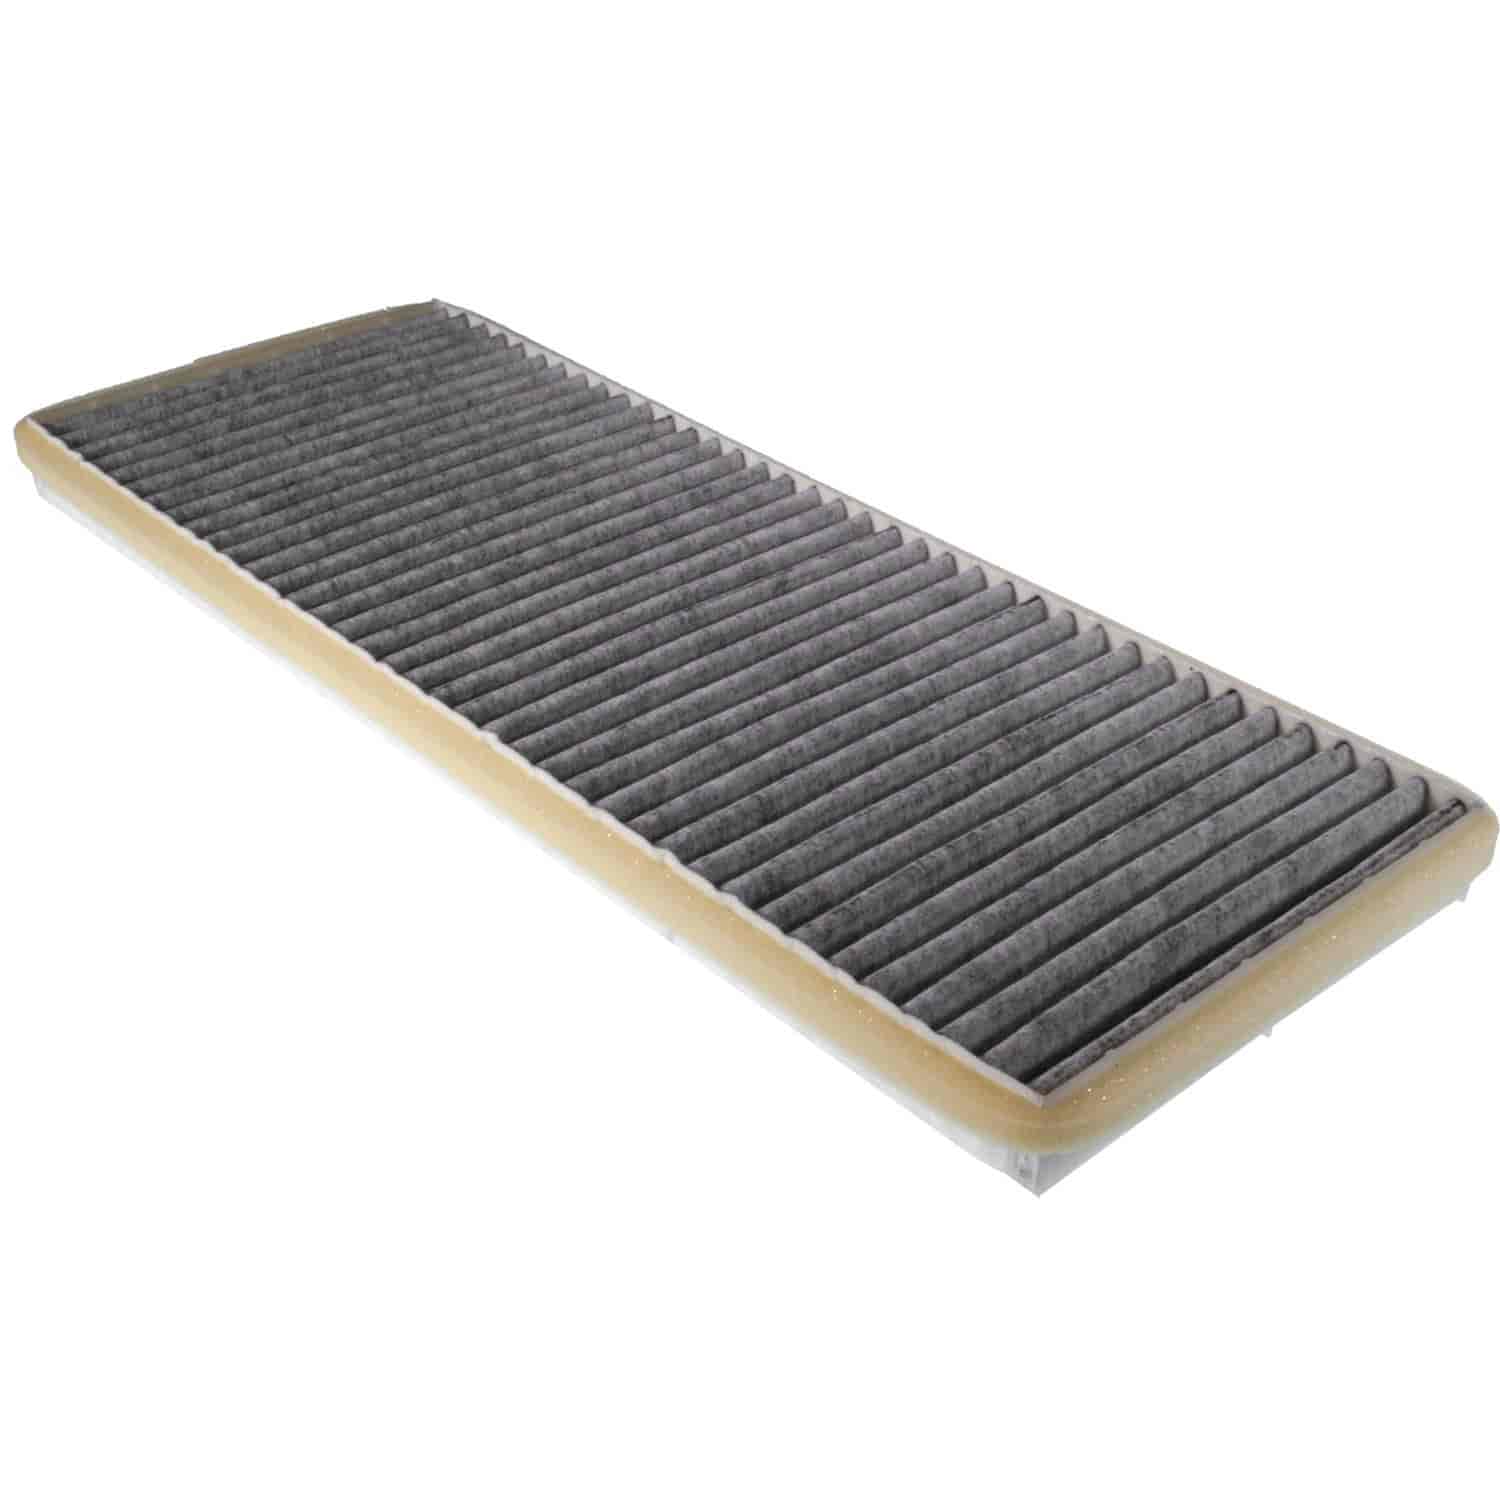 Mahle Cabin Air Filter Audi A4 1.8L Turbo 2.8L 1996-2001 Cabriolet 2.8L AAH AFC 1995